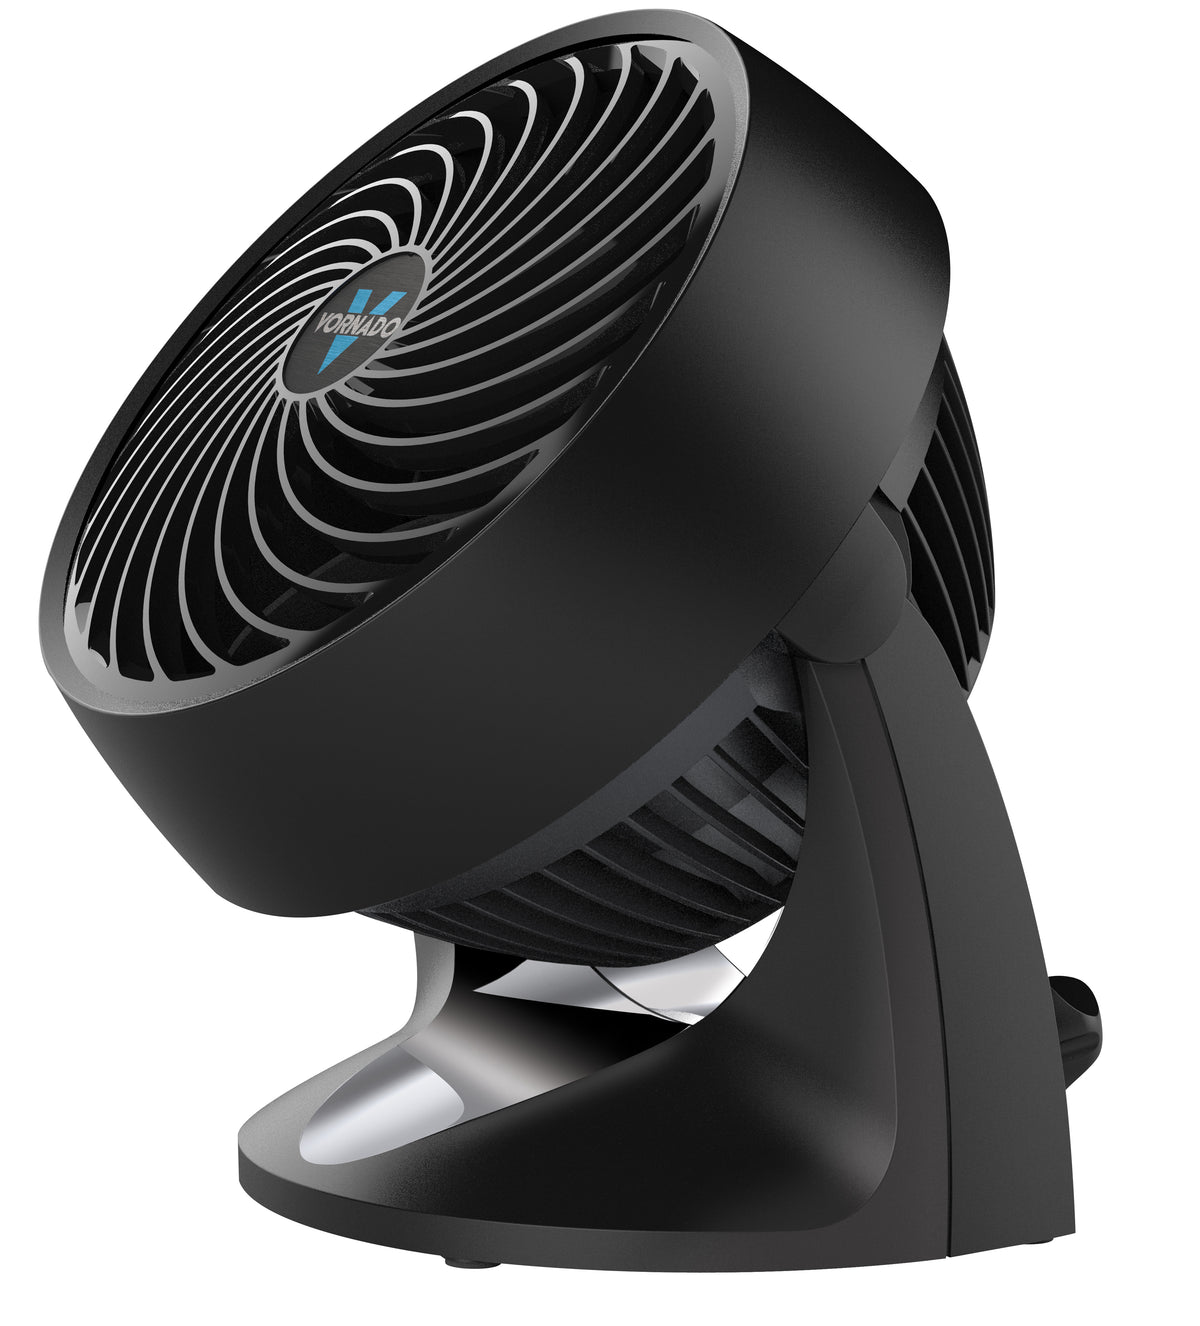 buy whole house fans at cheap rate in bulk. wholesale & retail ventilation & fans repair tools store.